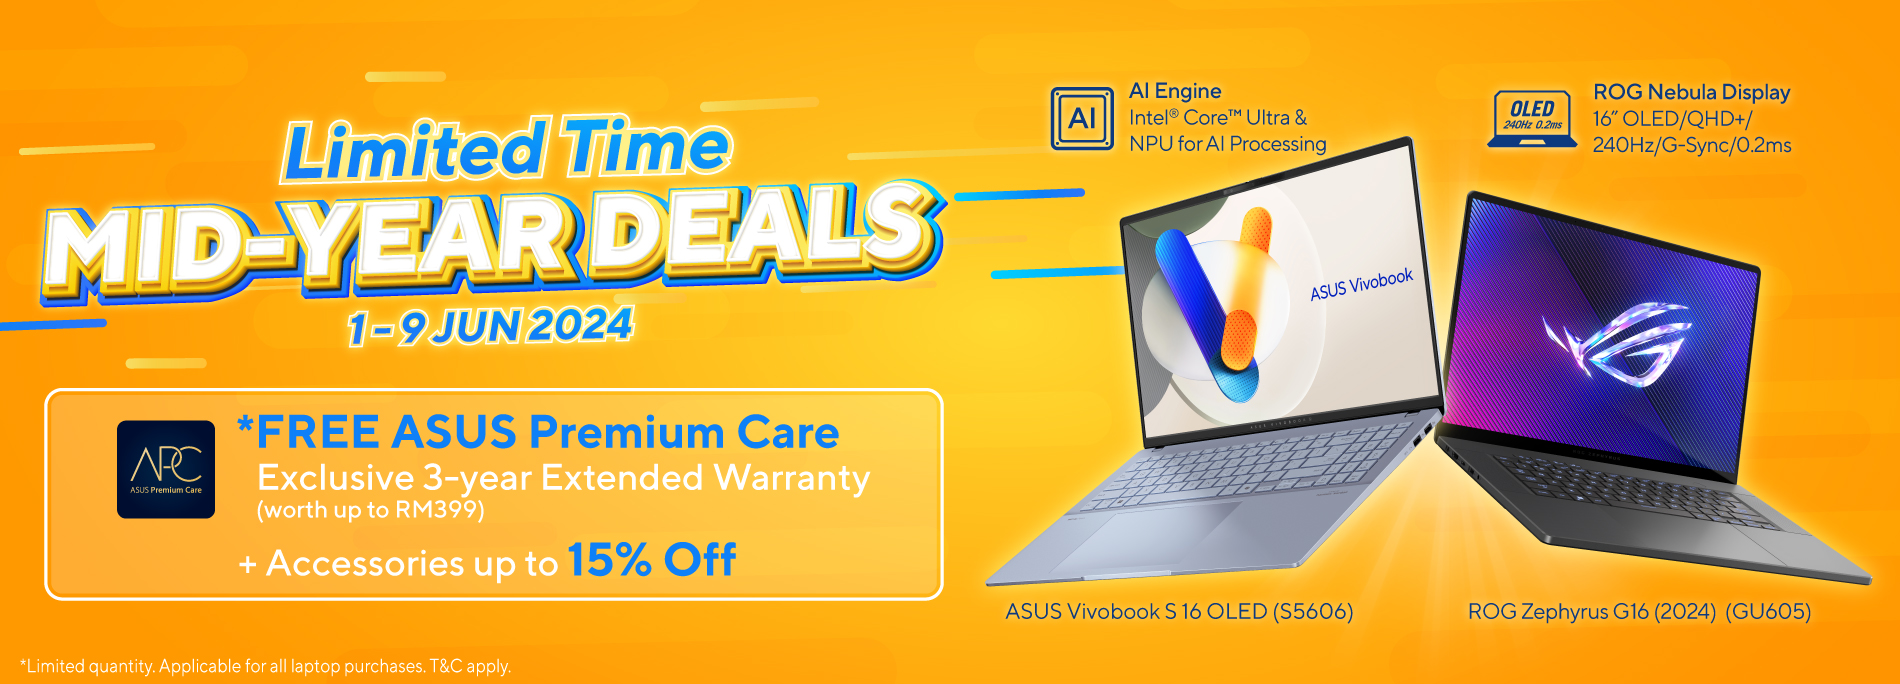 Limited Time Mid-Year Deals